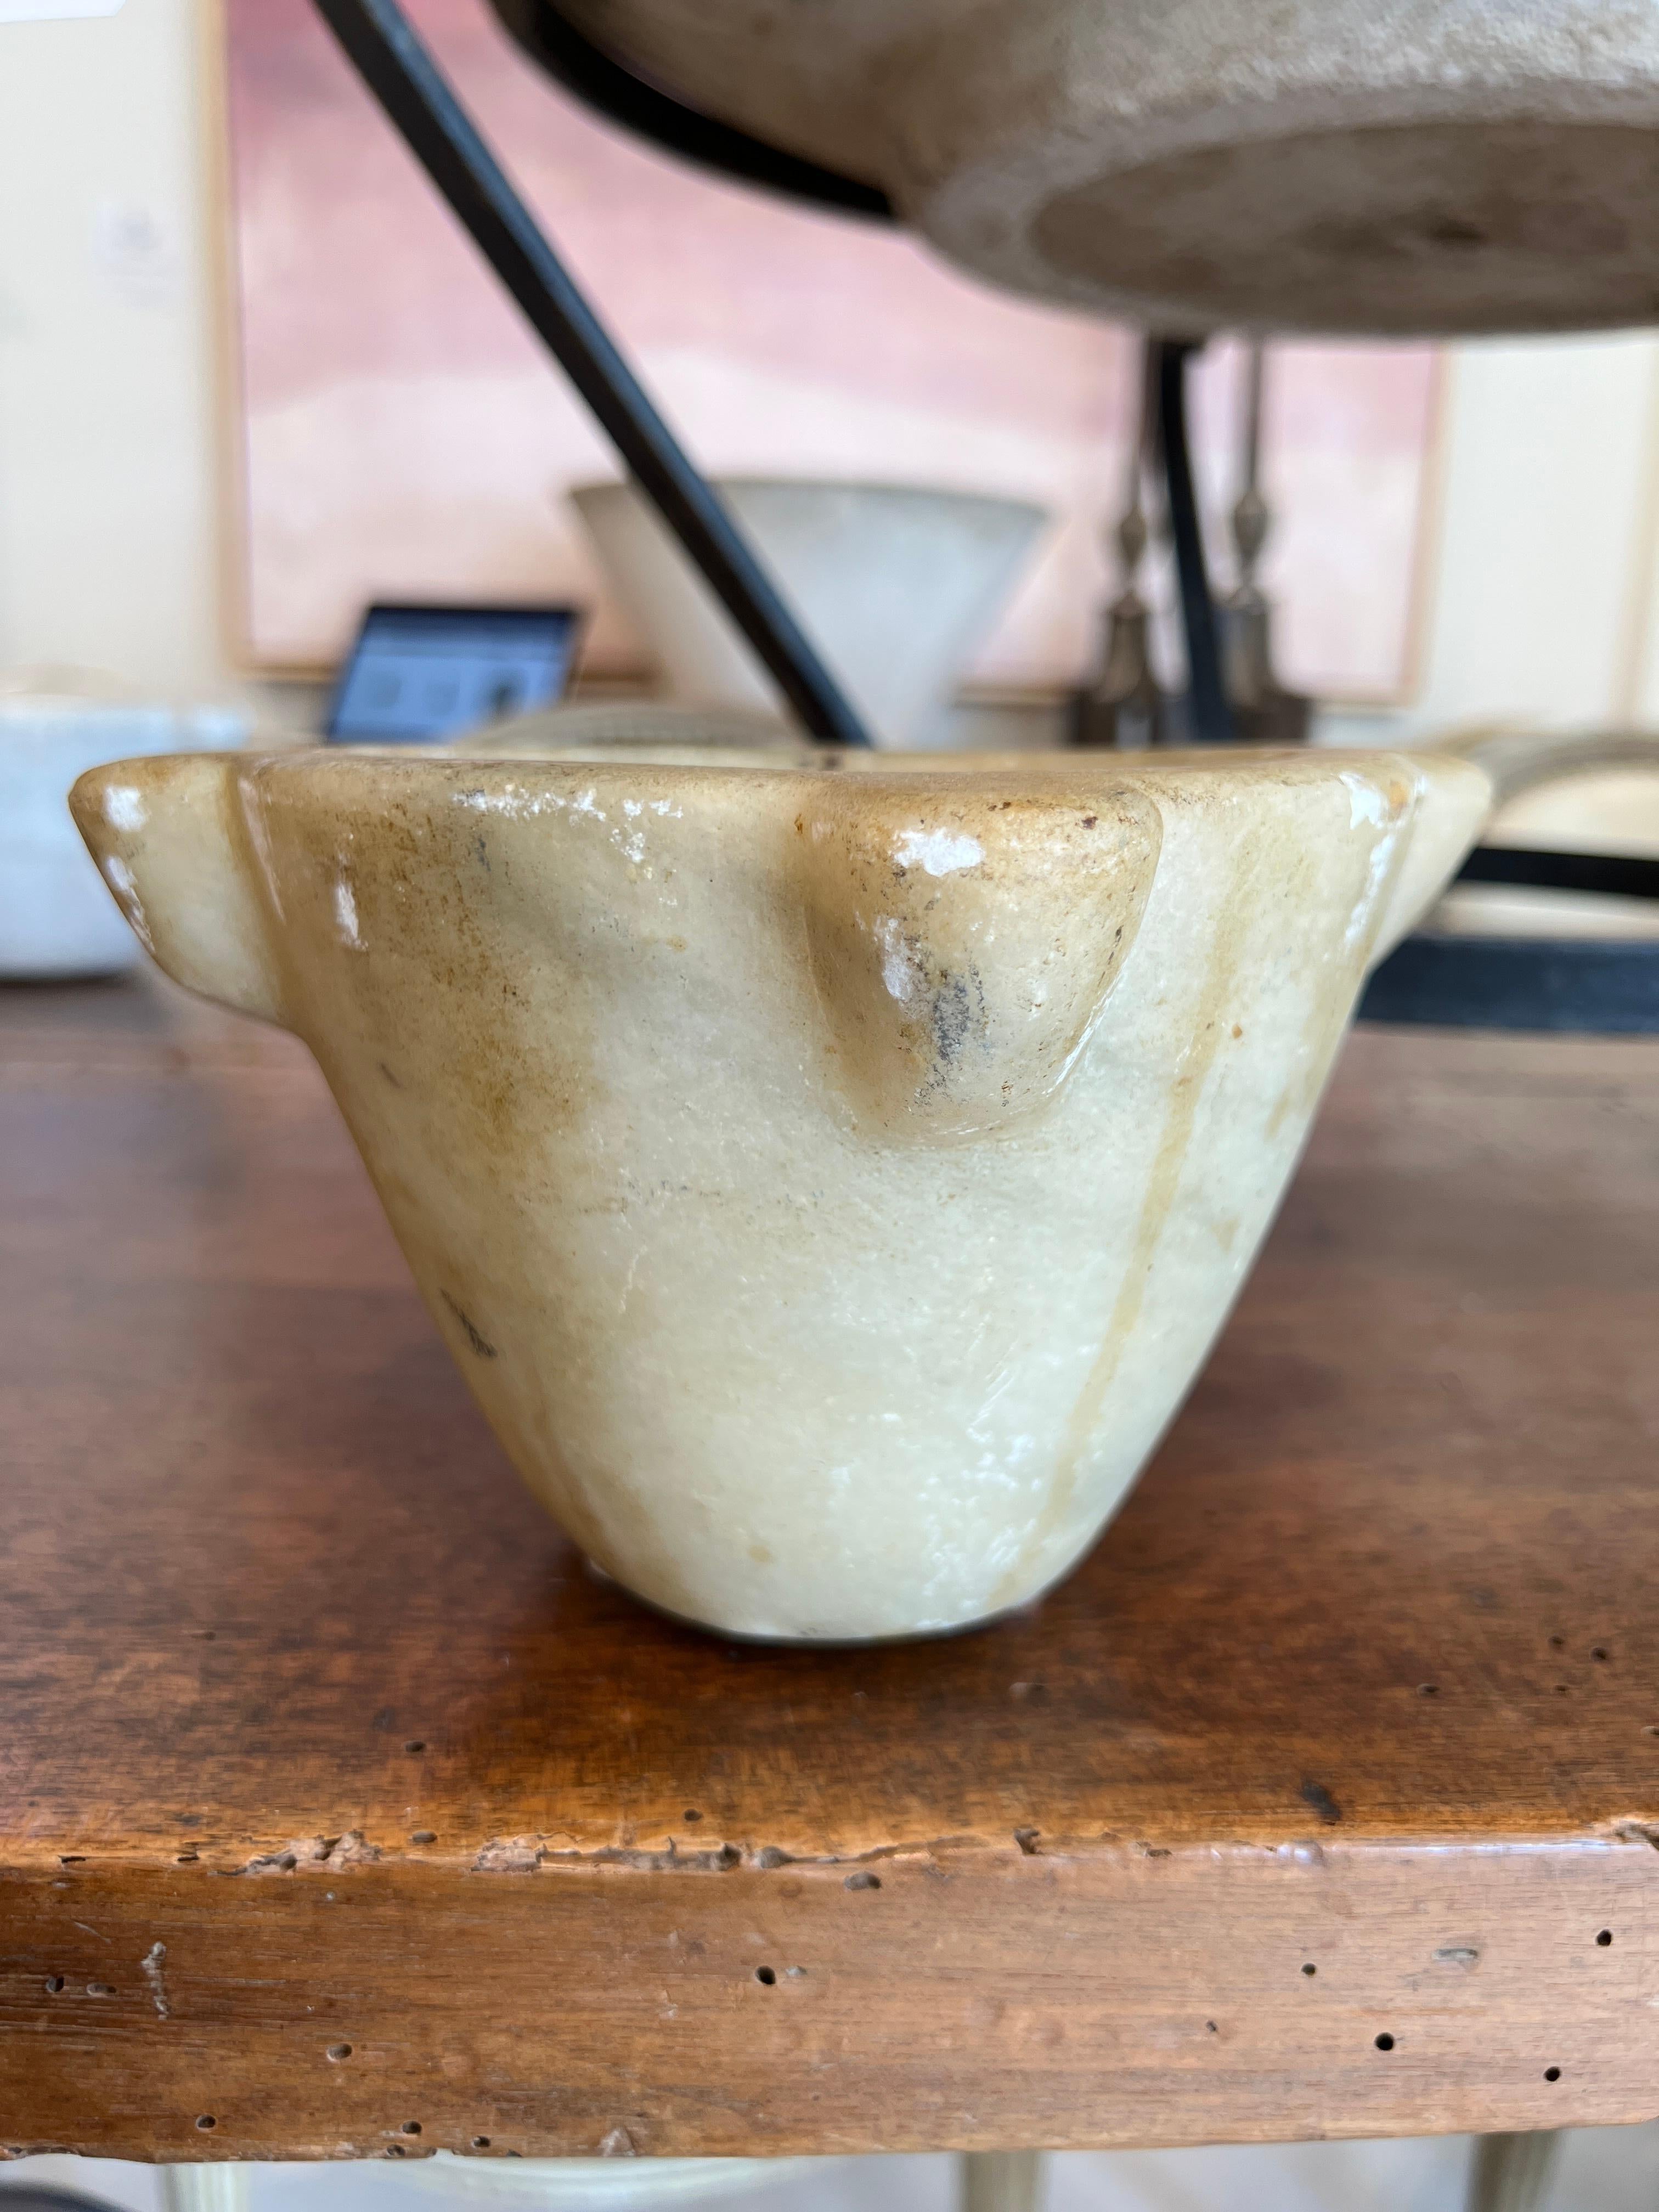 Beautiful marble mortar for crushing spices or just sitting as a decorative accessory.